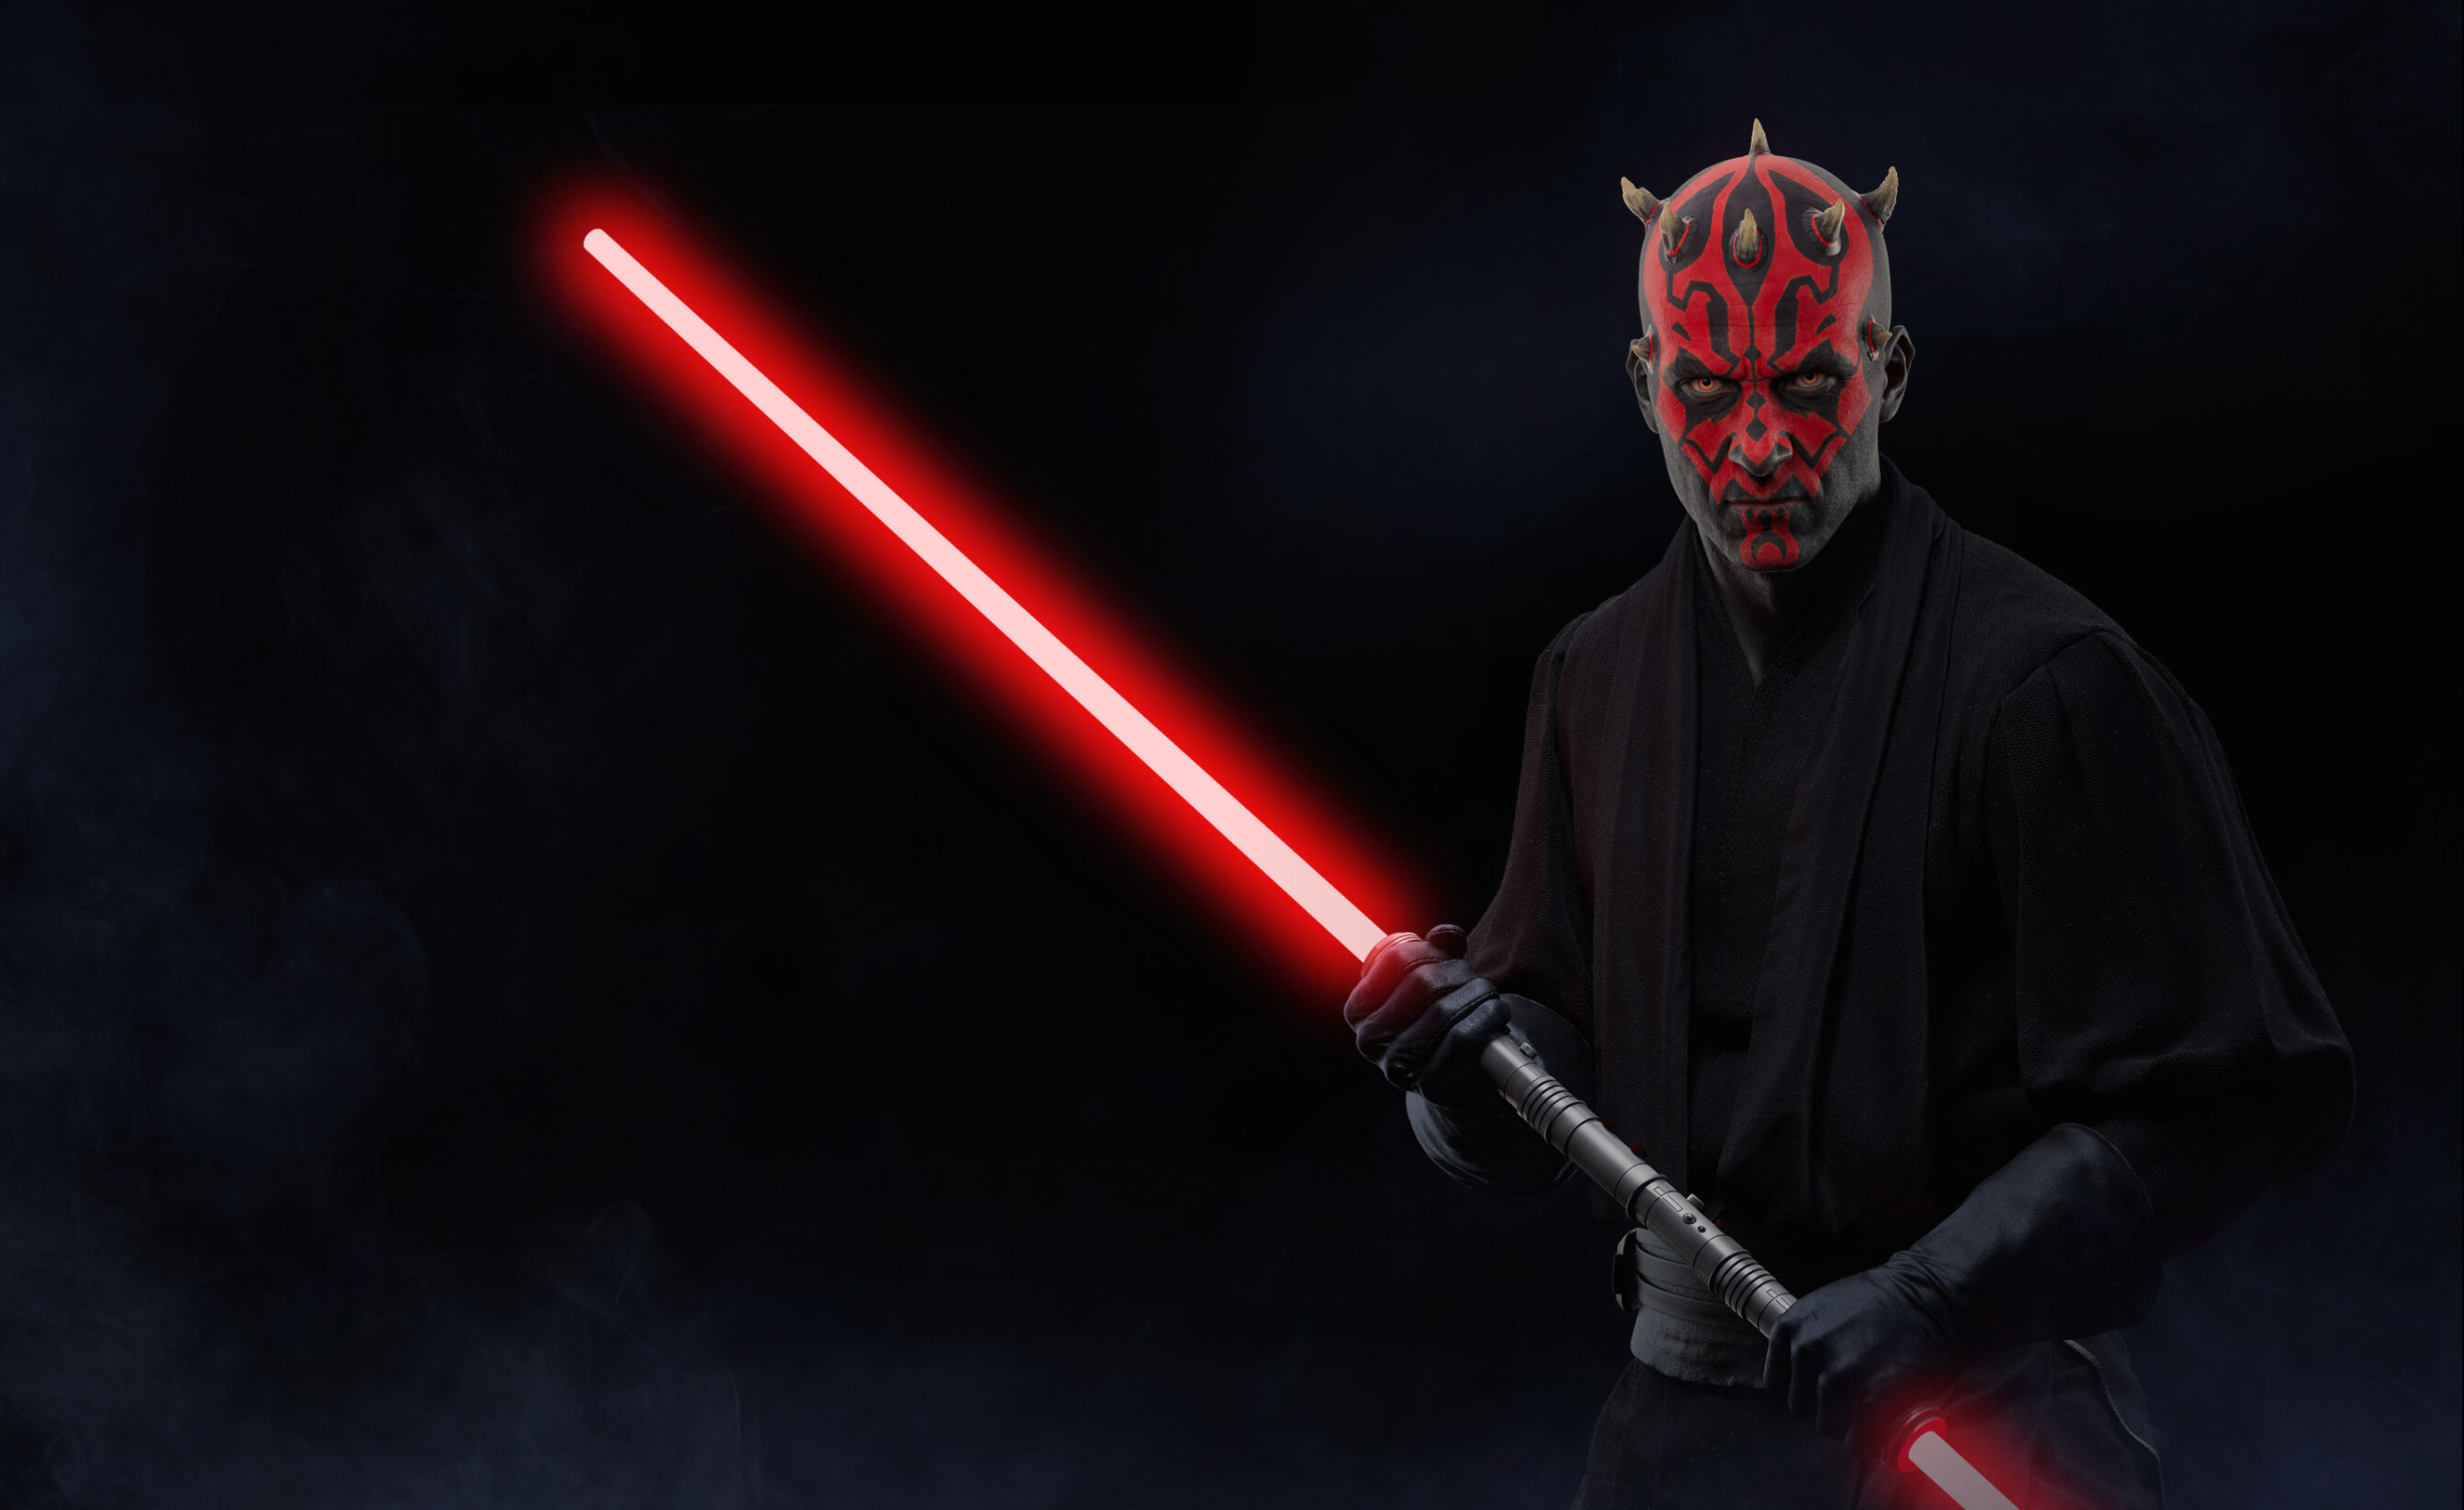 Darth Maul Wallpaper The Best Image In